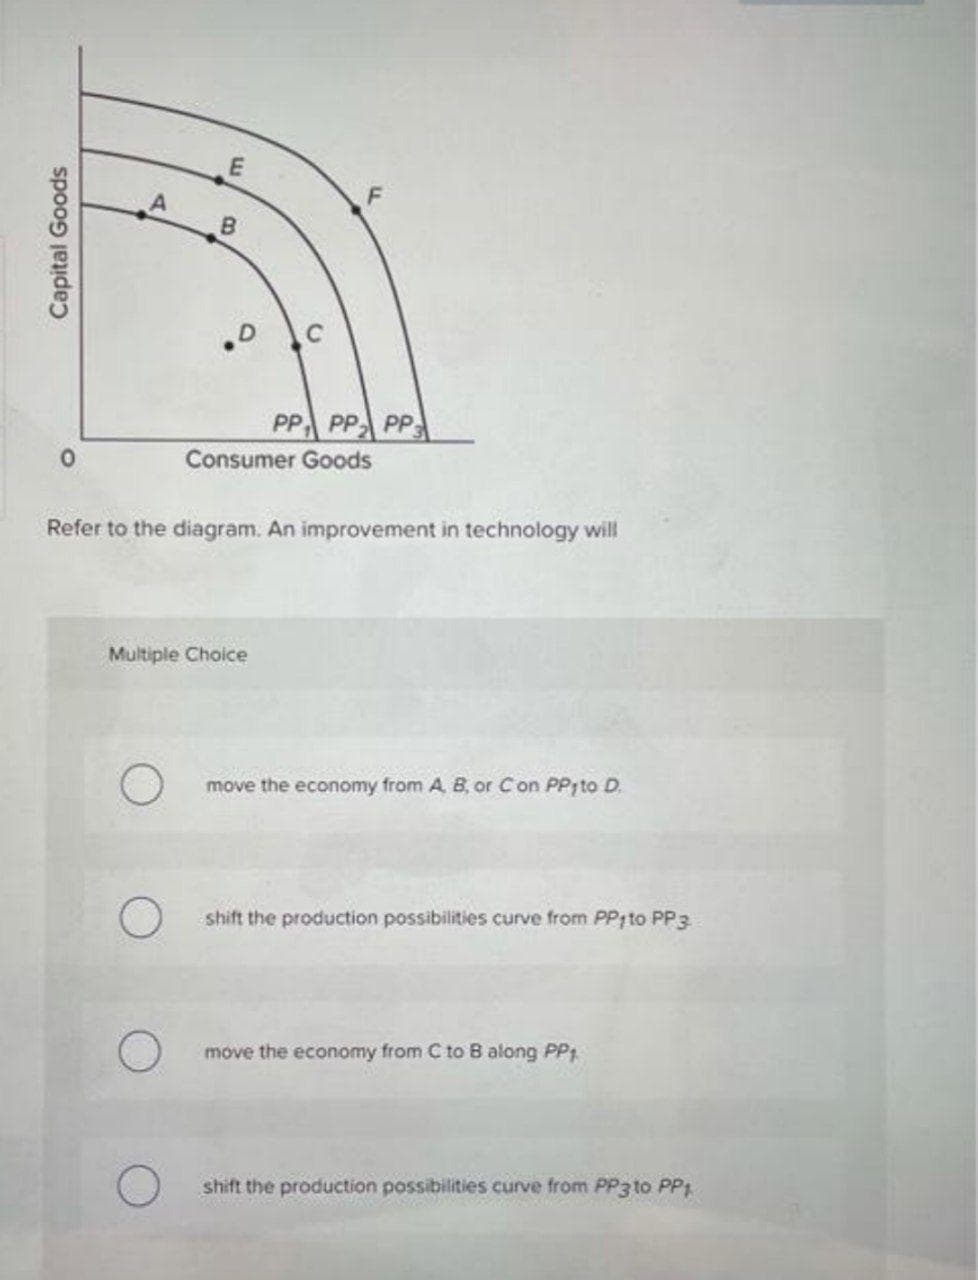 PP PP PP
Consumer Goods
Refer to the diagram. An improvement in technology will
Multiple Choice
move the economy from A B, or Con PP, to D.
shift the production possibilities curve from PP to PP3
move the economy from C to B along PP1
shift the production possibilities curve from PP3 to PP
Capital Goods
